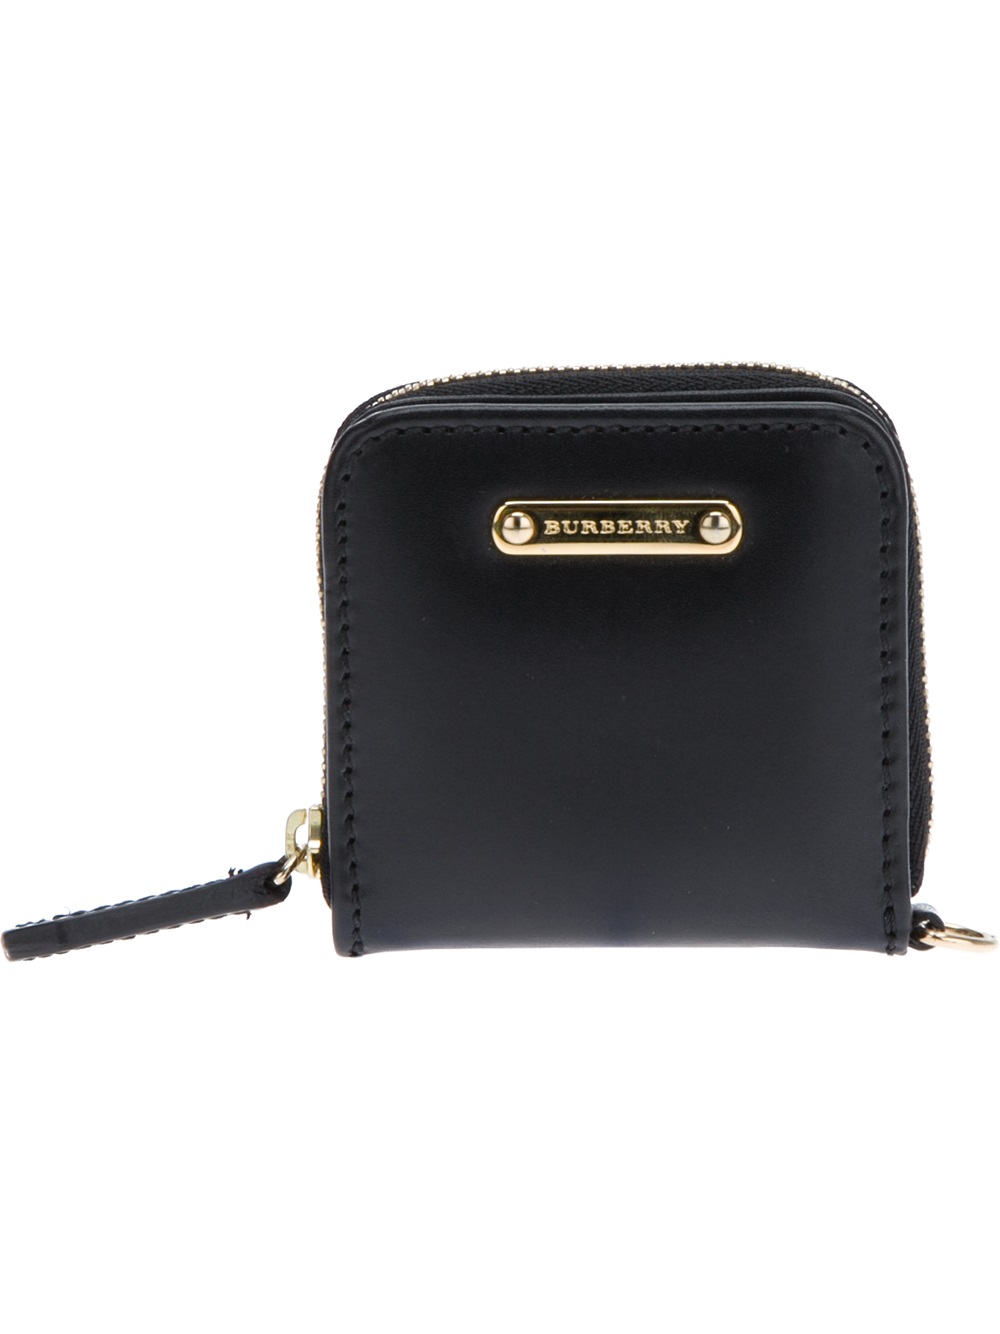 Burberry Coin Purse in Black | Lyst